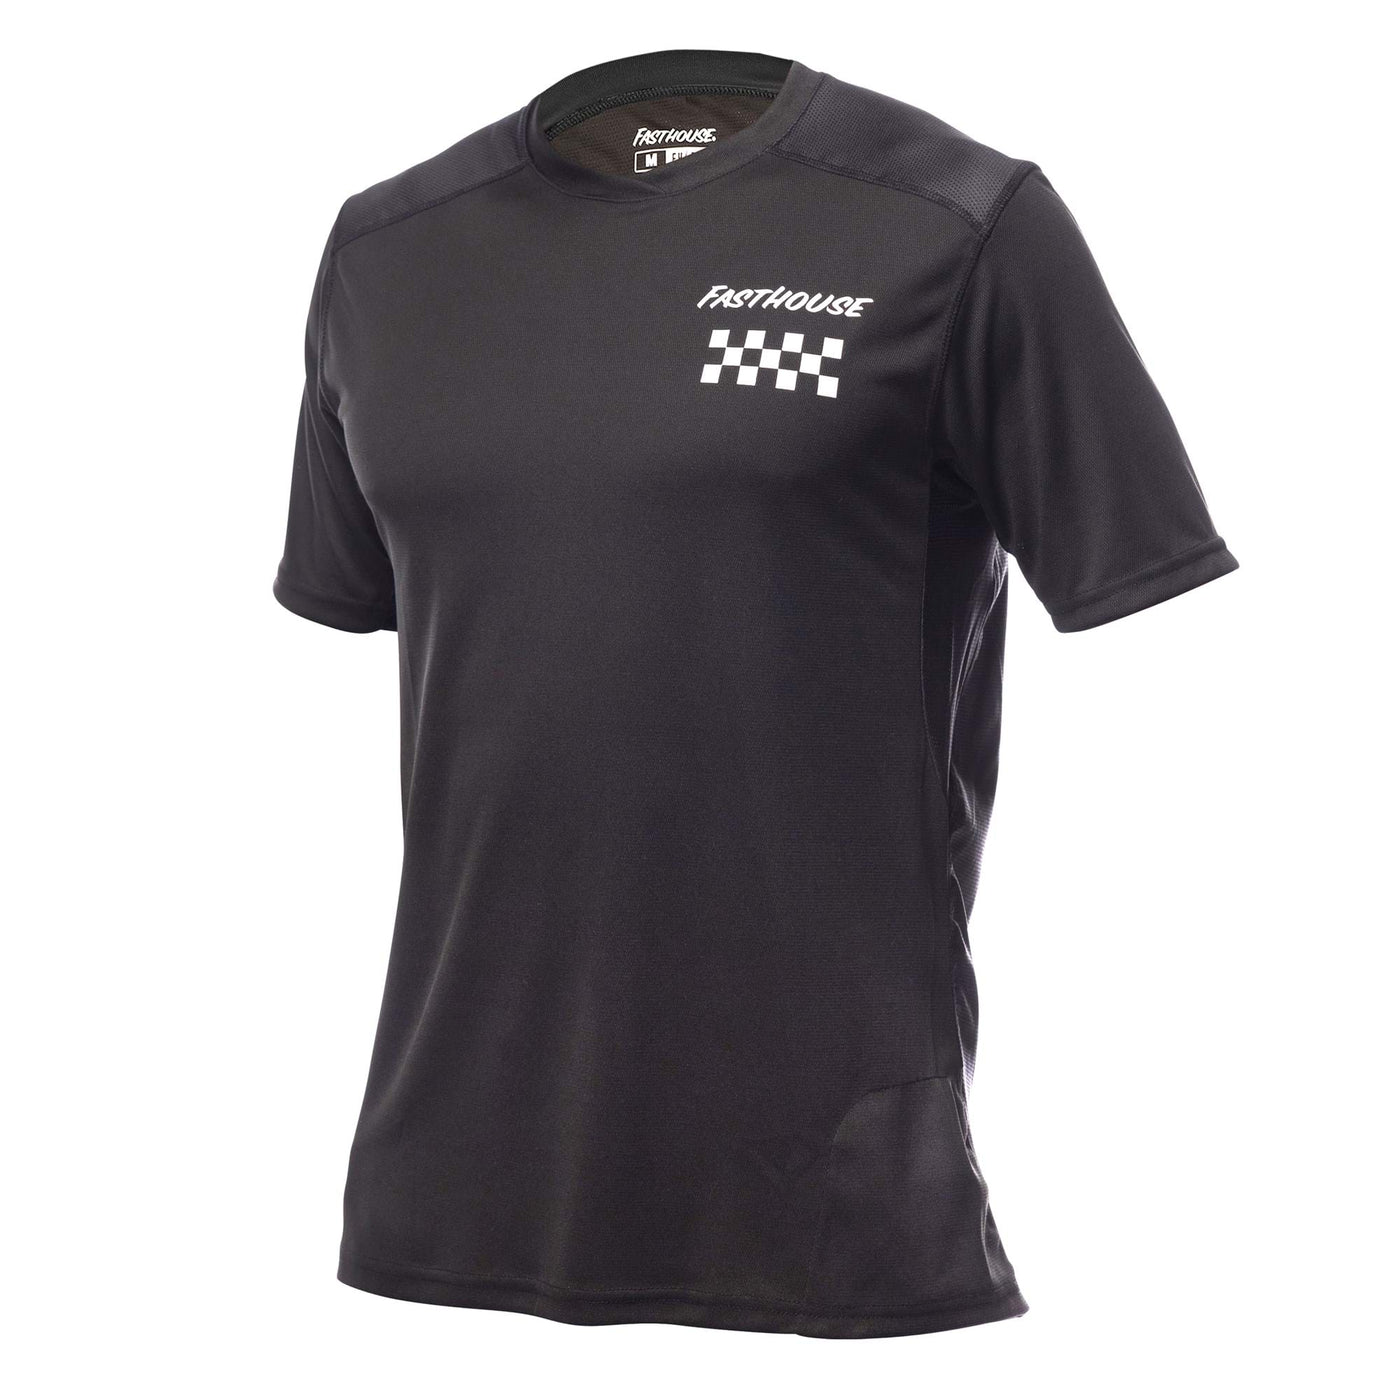 FASTHOUSE ALLOY RALLY SHORT SLEEVE JERSEY - Black